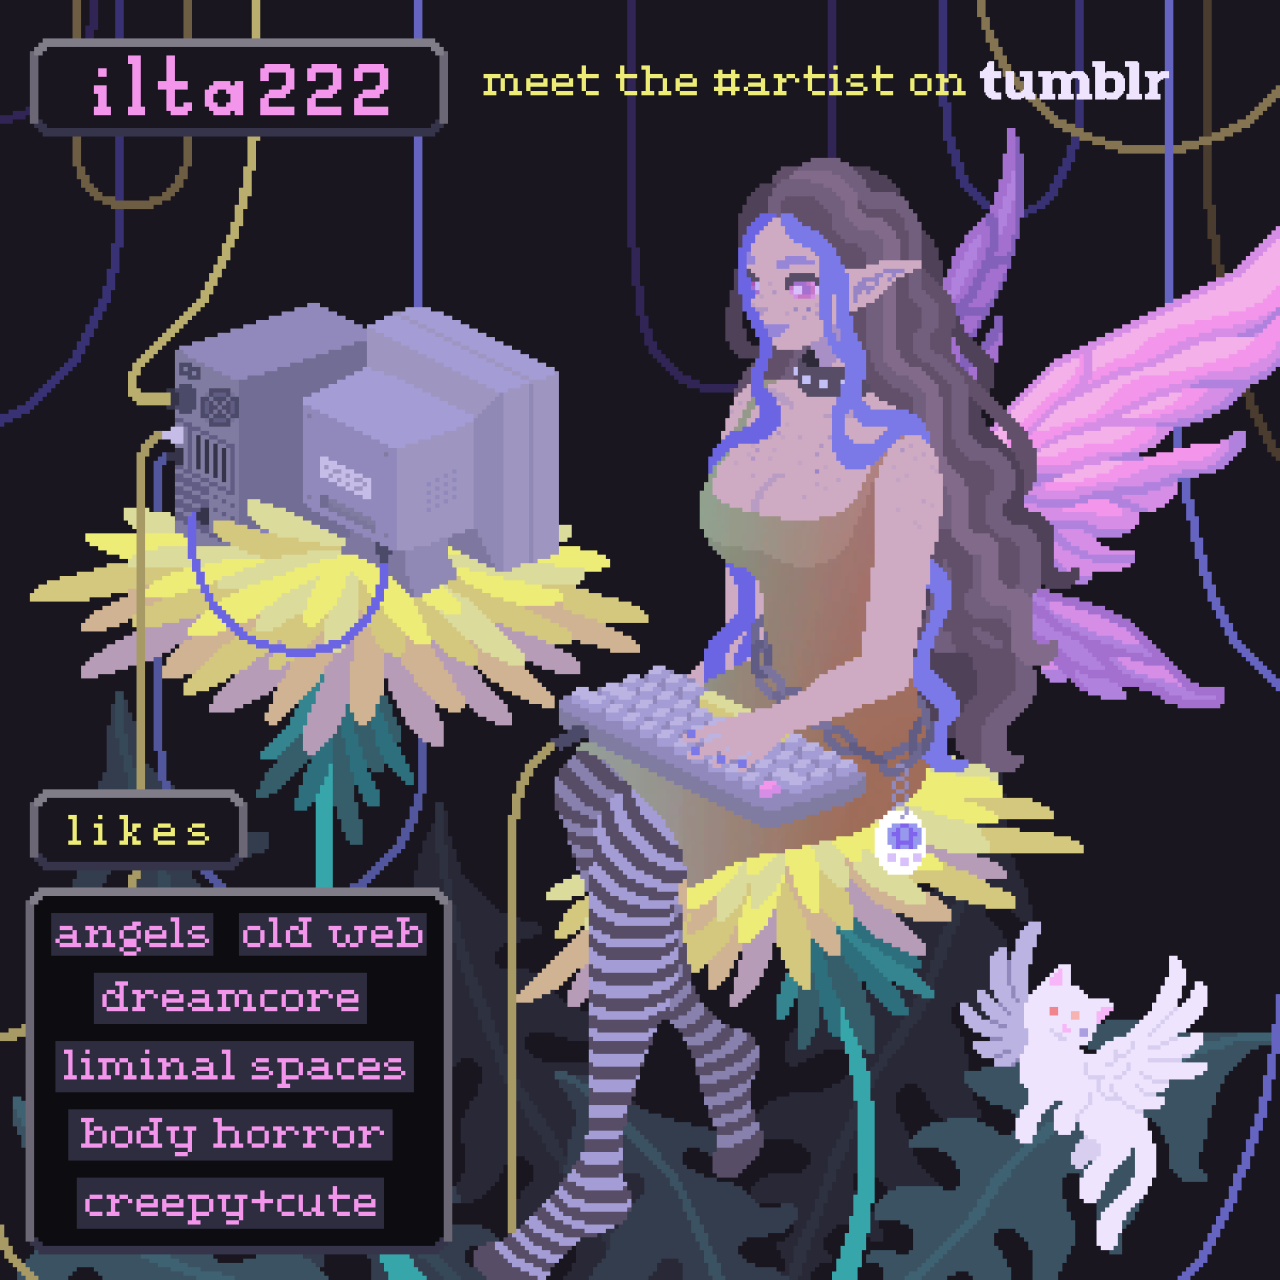 Meet the Artist: @ilta222“heya! i’m ilta (she/her), and i’m a pixel artist! i make art that fluctuates between cute, strange, and creepy. i tend to focus on aesthetics and soft colors. for work, i make pixel art commissions, and pixel art video...